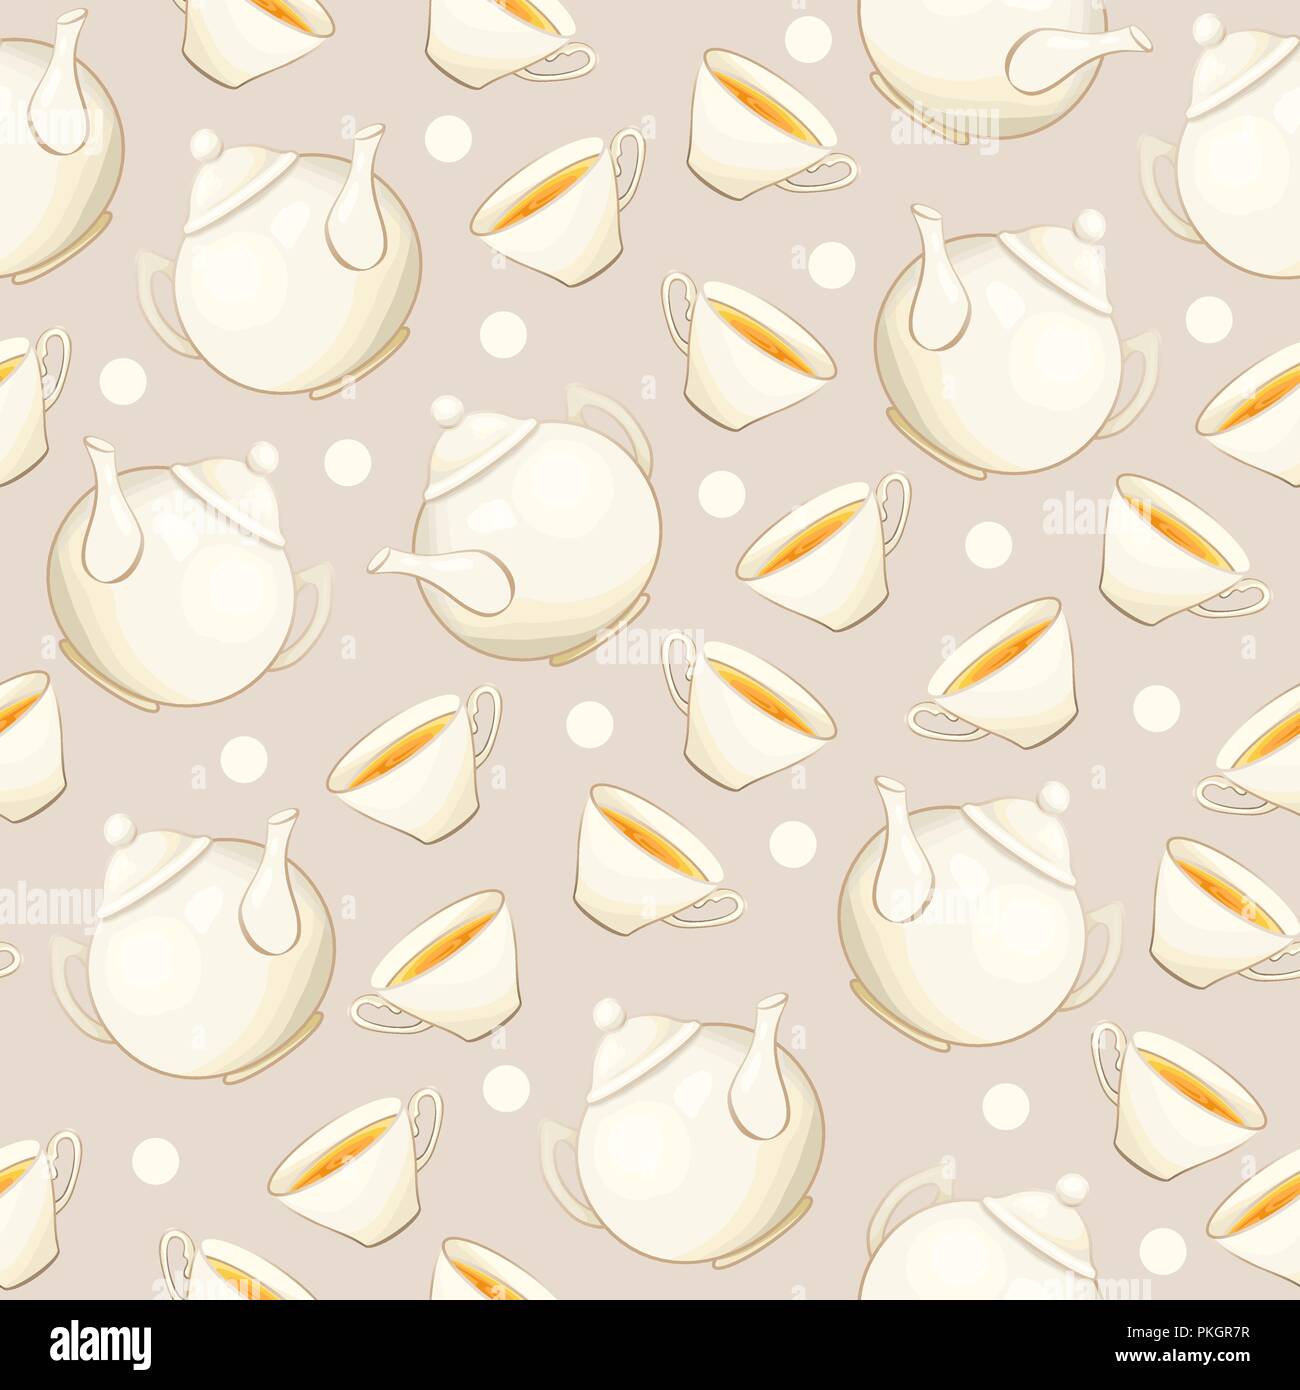 Tea or Coffee Seamless Pattern with Porcelain Teapot and Tea cup in Flat Style. Ready to Print on Fabric Textile, Tablecloth or Paper Gift Wrapping and Scrapbooking Stock Vector